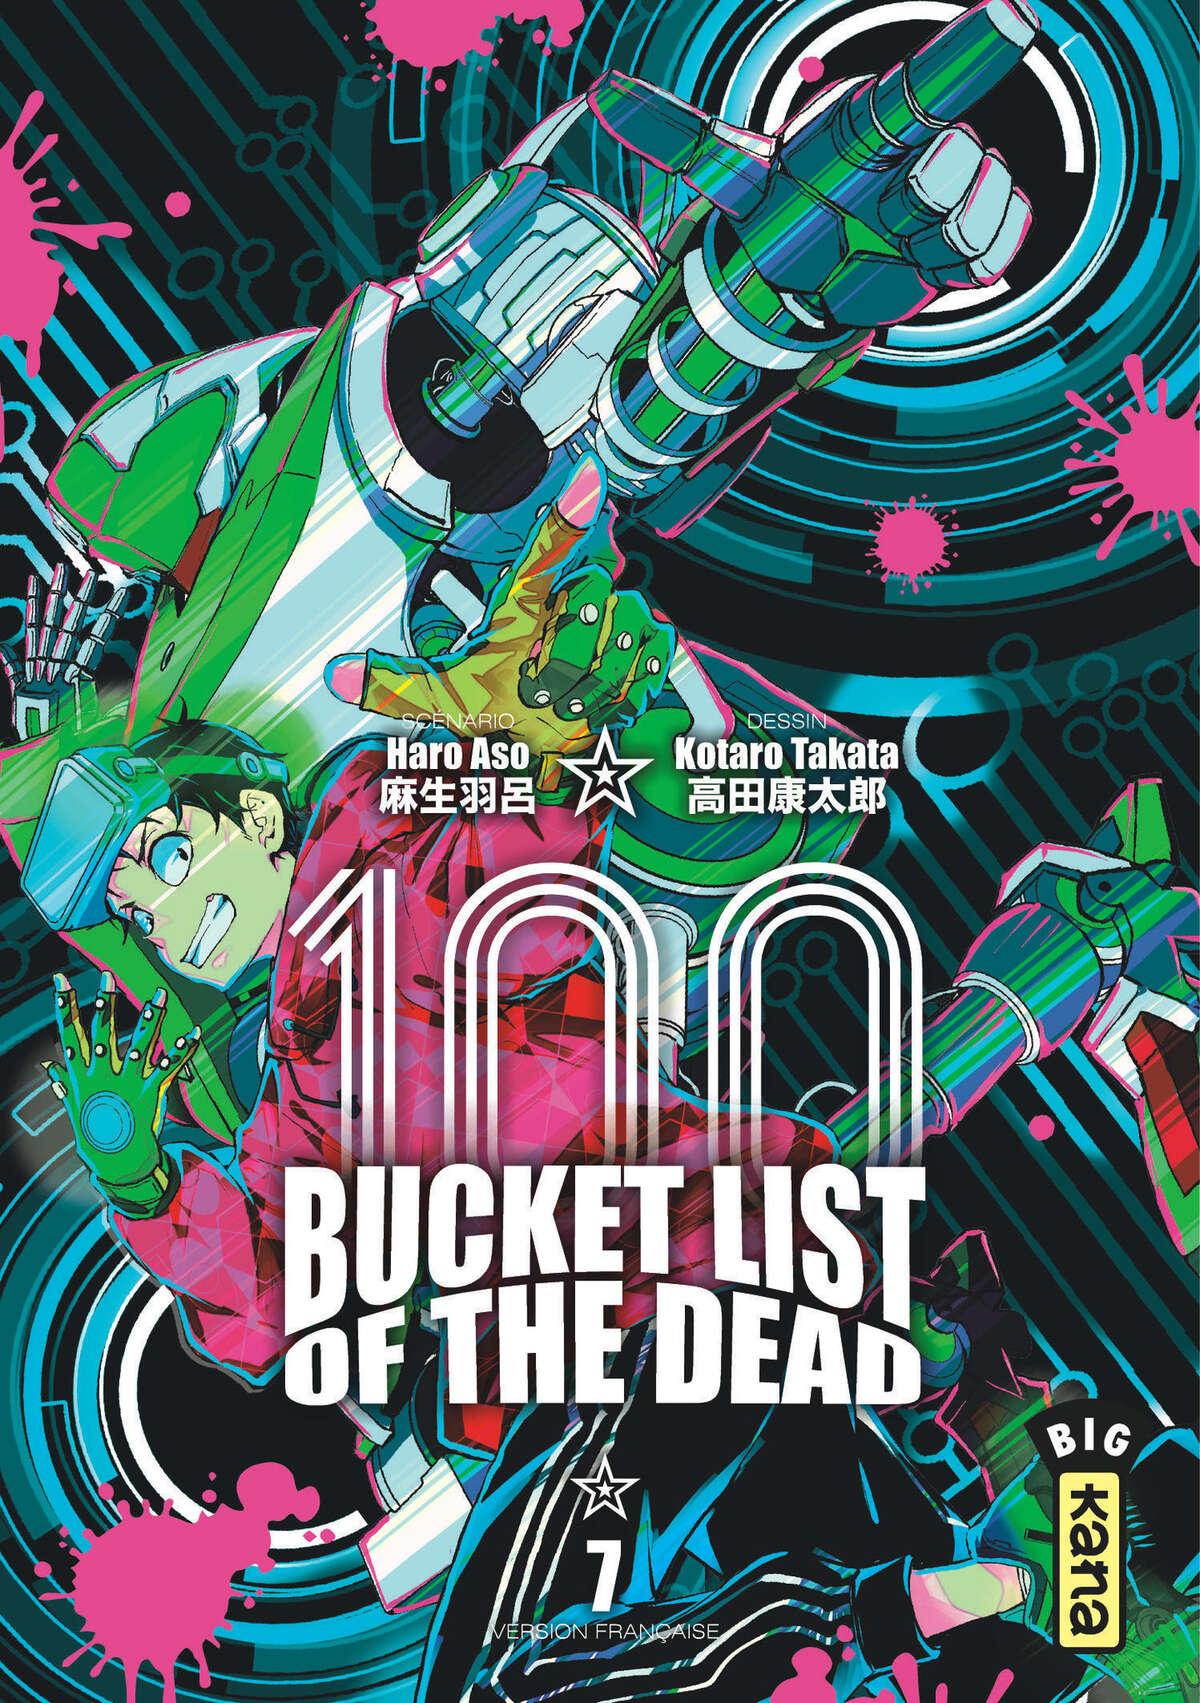 Bucket List of The Dead Volume 7 page 1